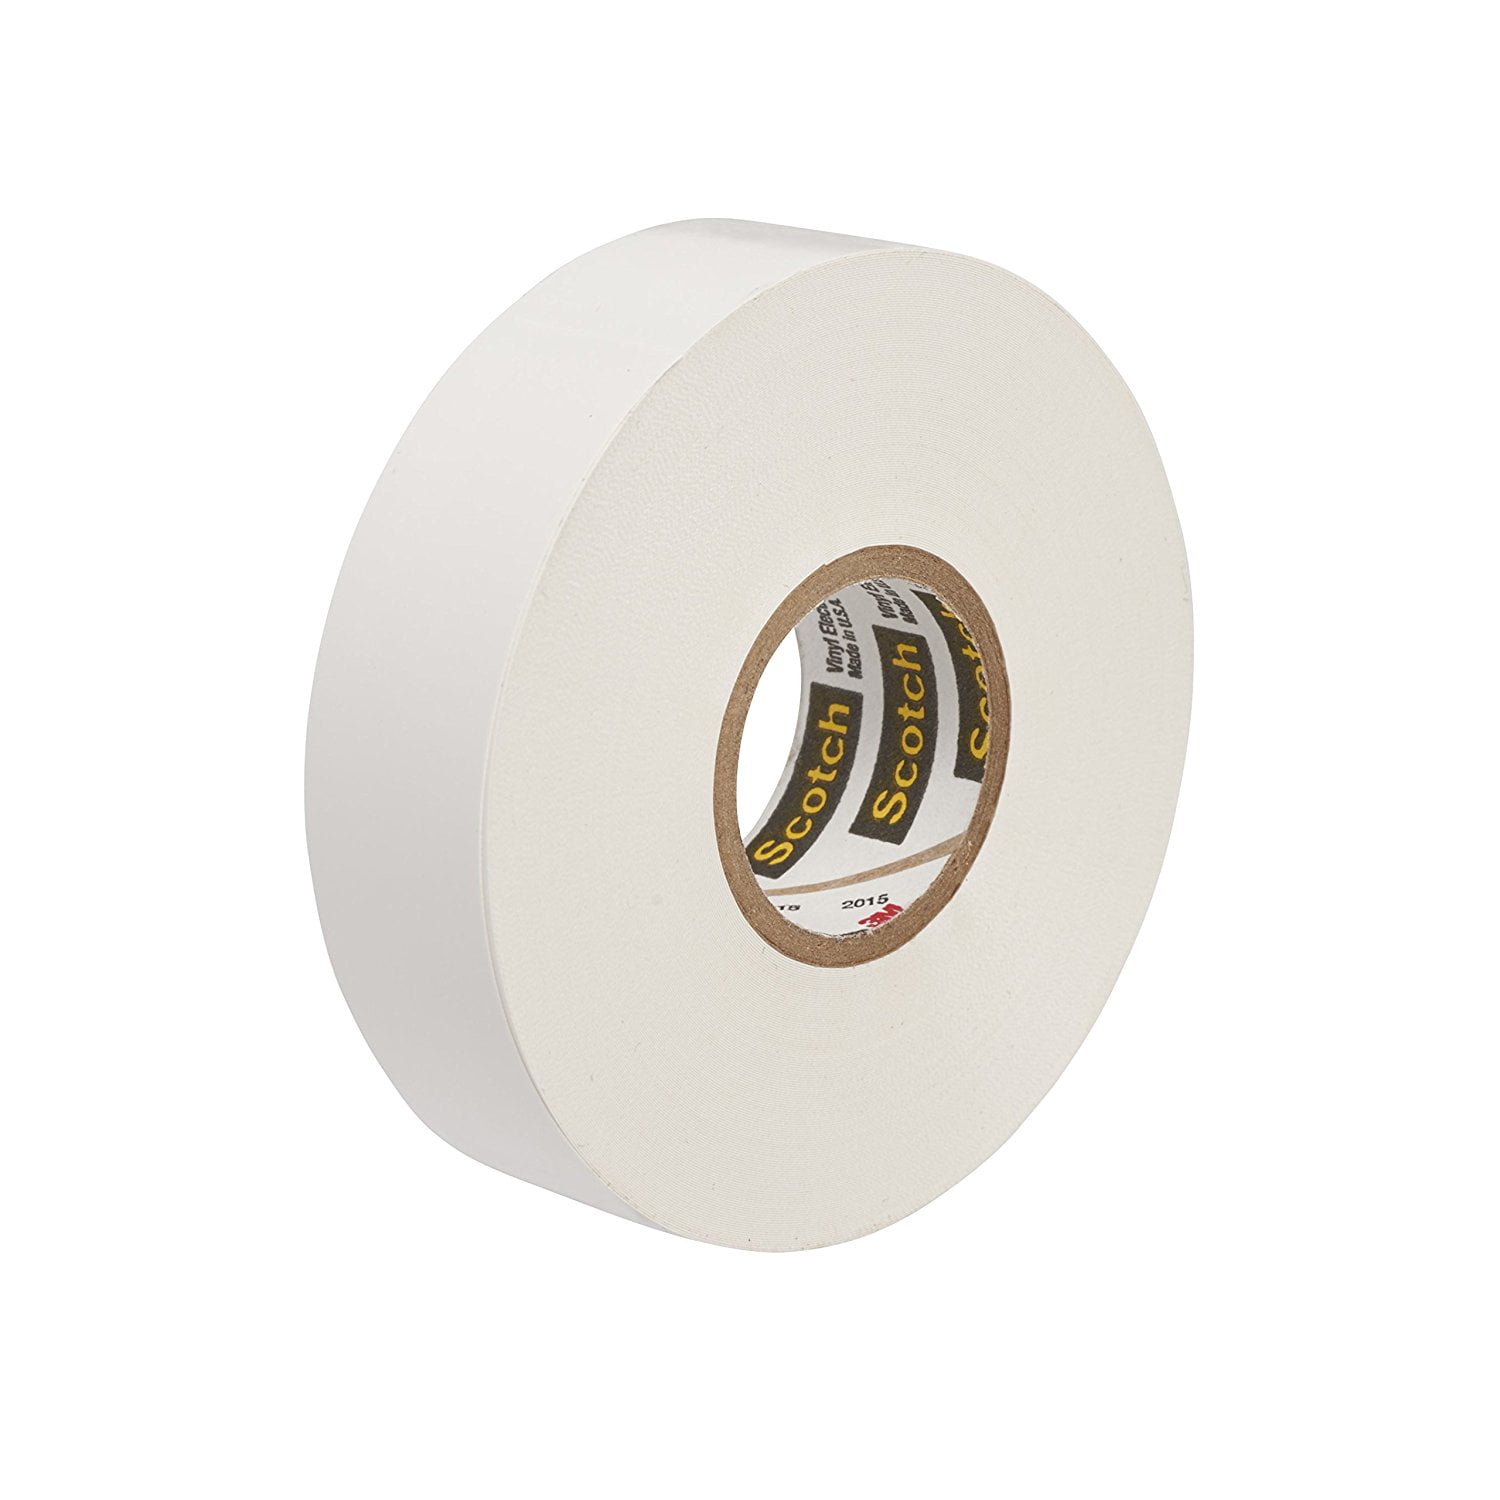 3M Scotch #35 Electrical Tape White .75-Inch by 66-Foot by .007-Inch 